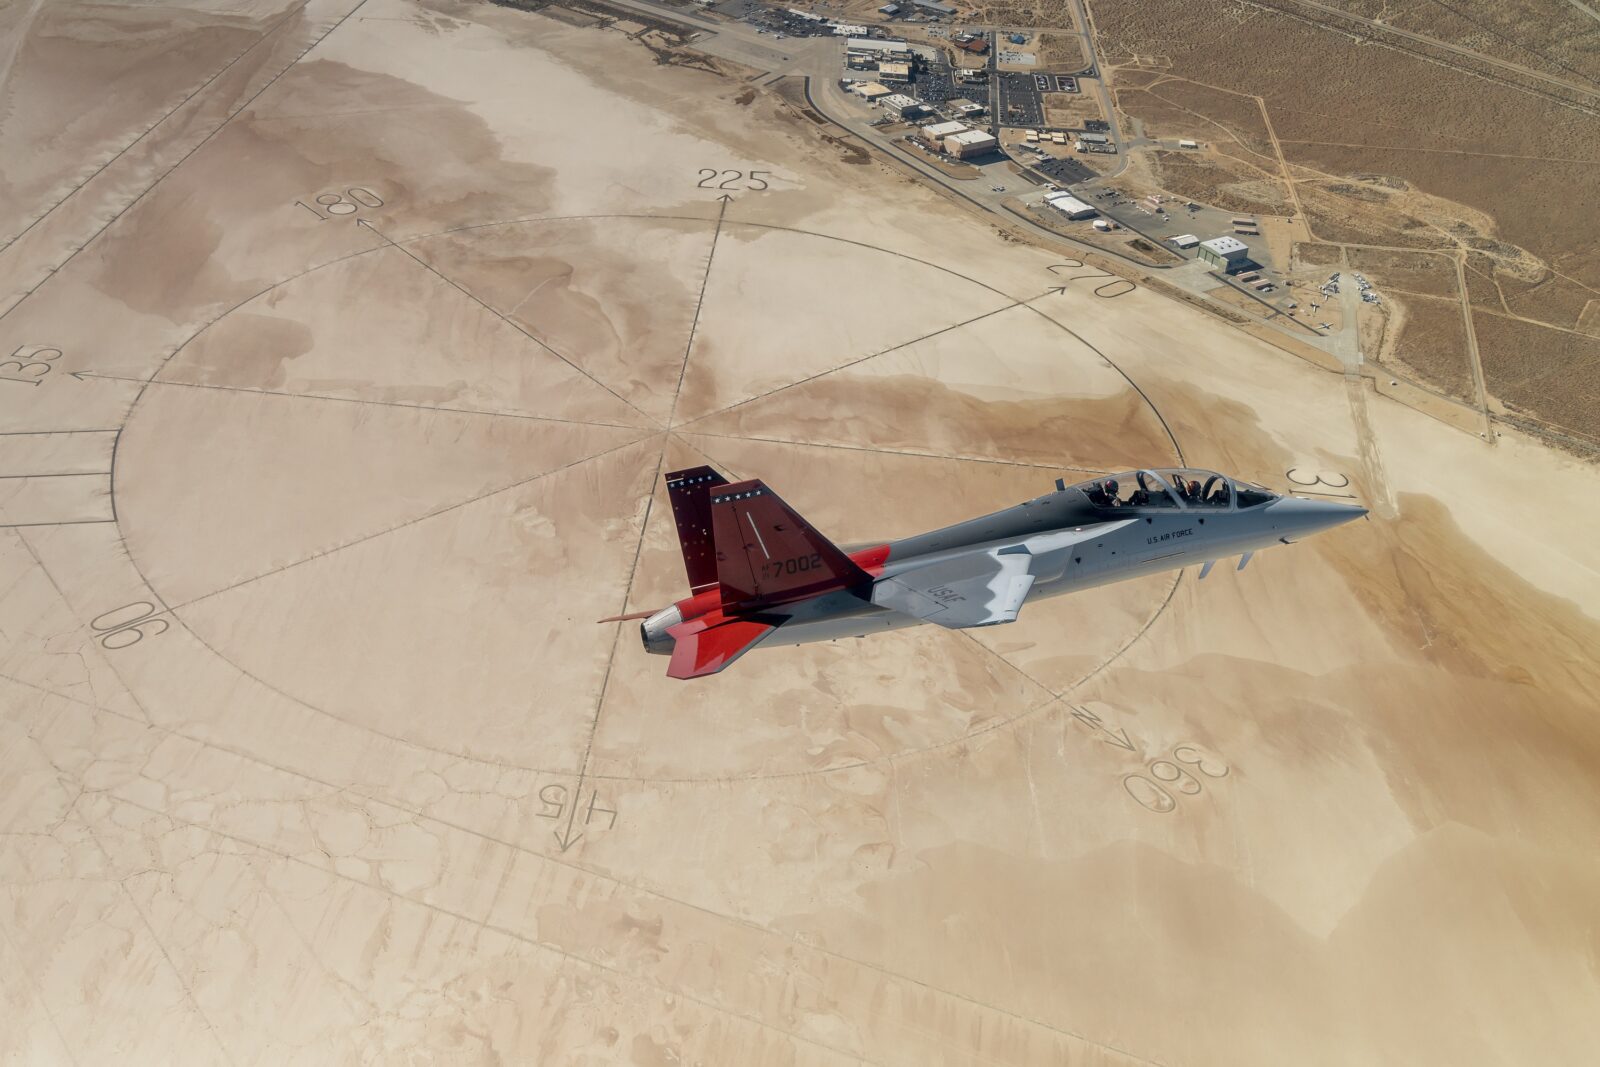 The T-7A Red Hawk made stops at Air Force bases in Oklahoma, New Mexico and Arizona to refuel